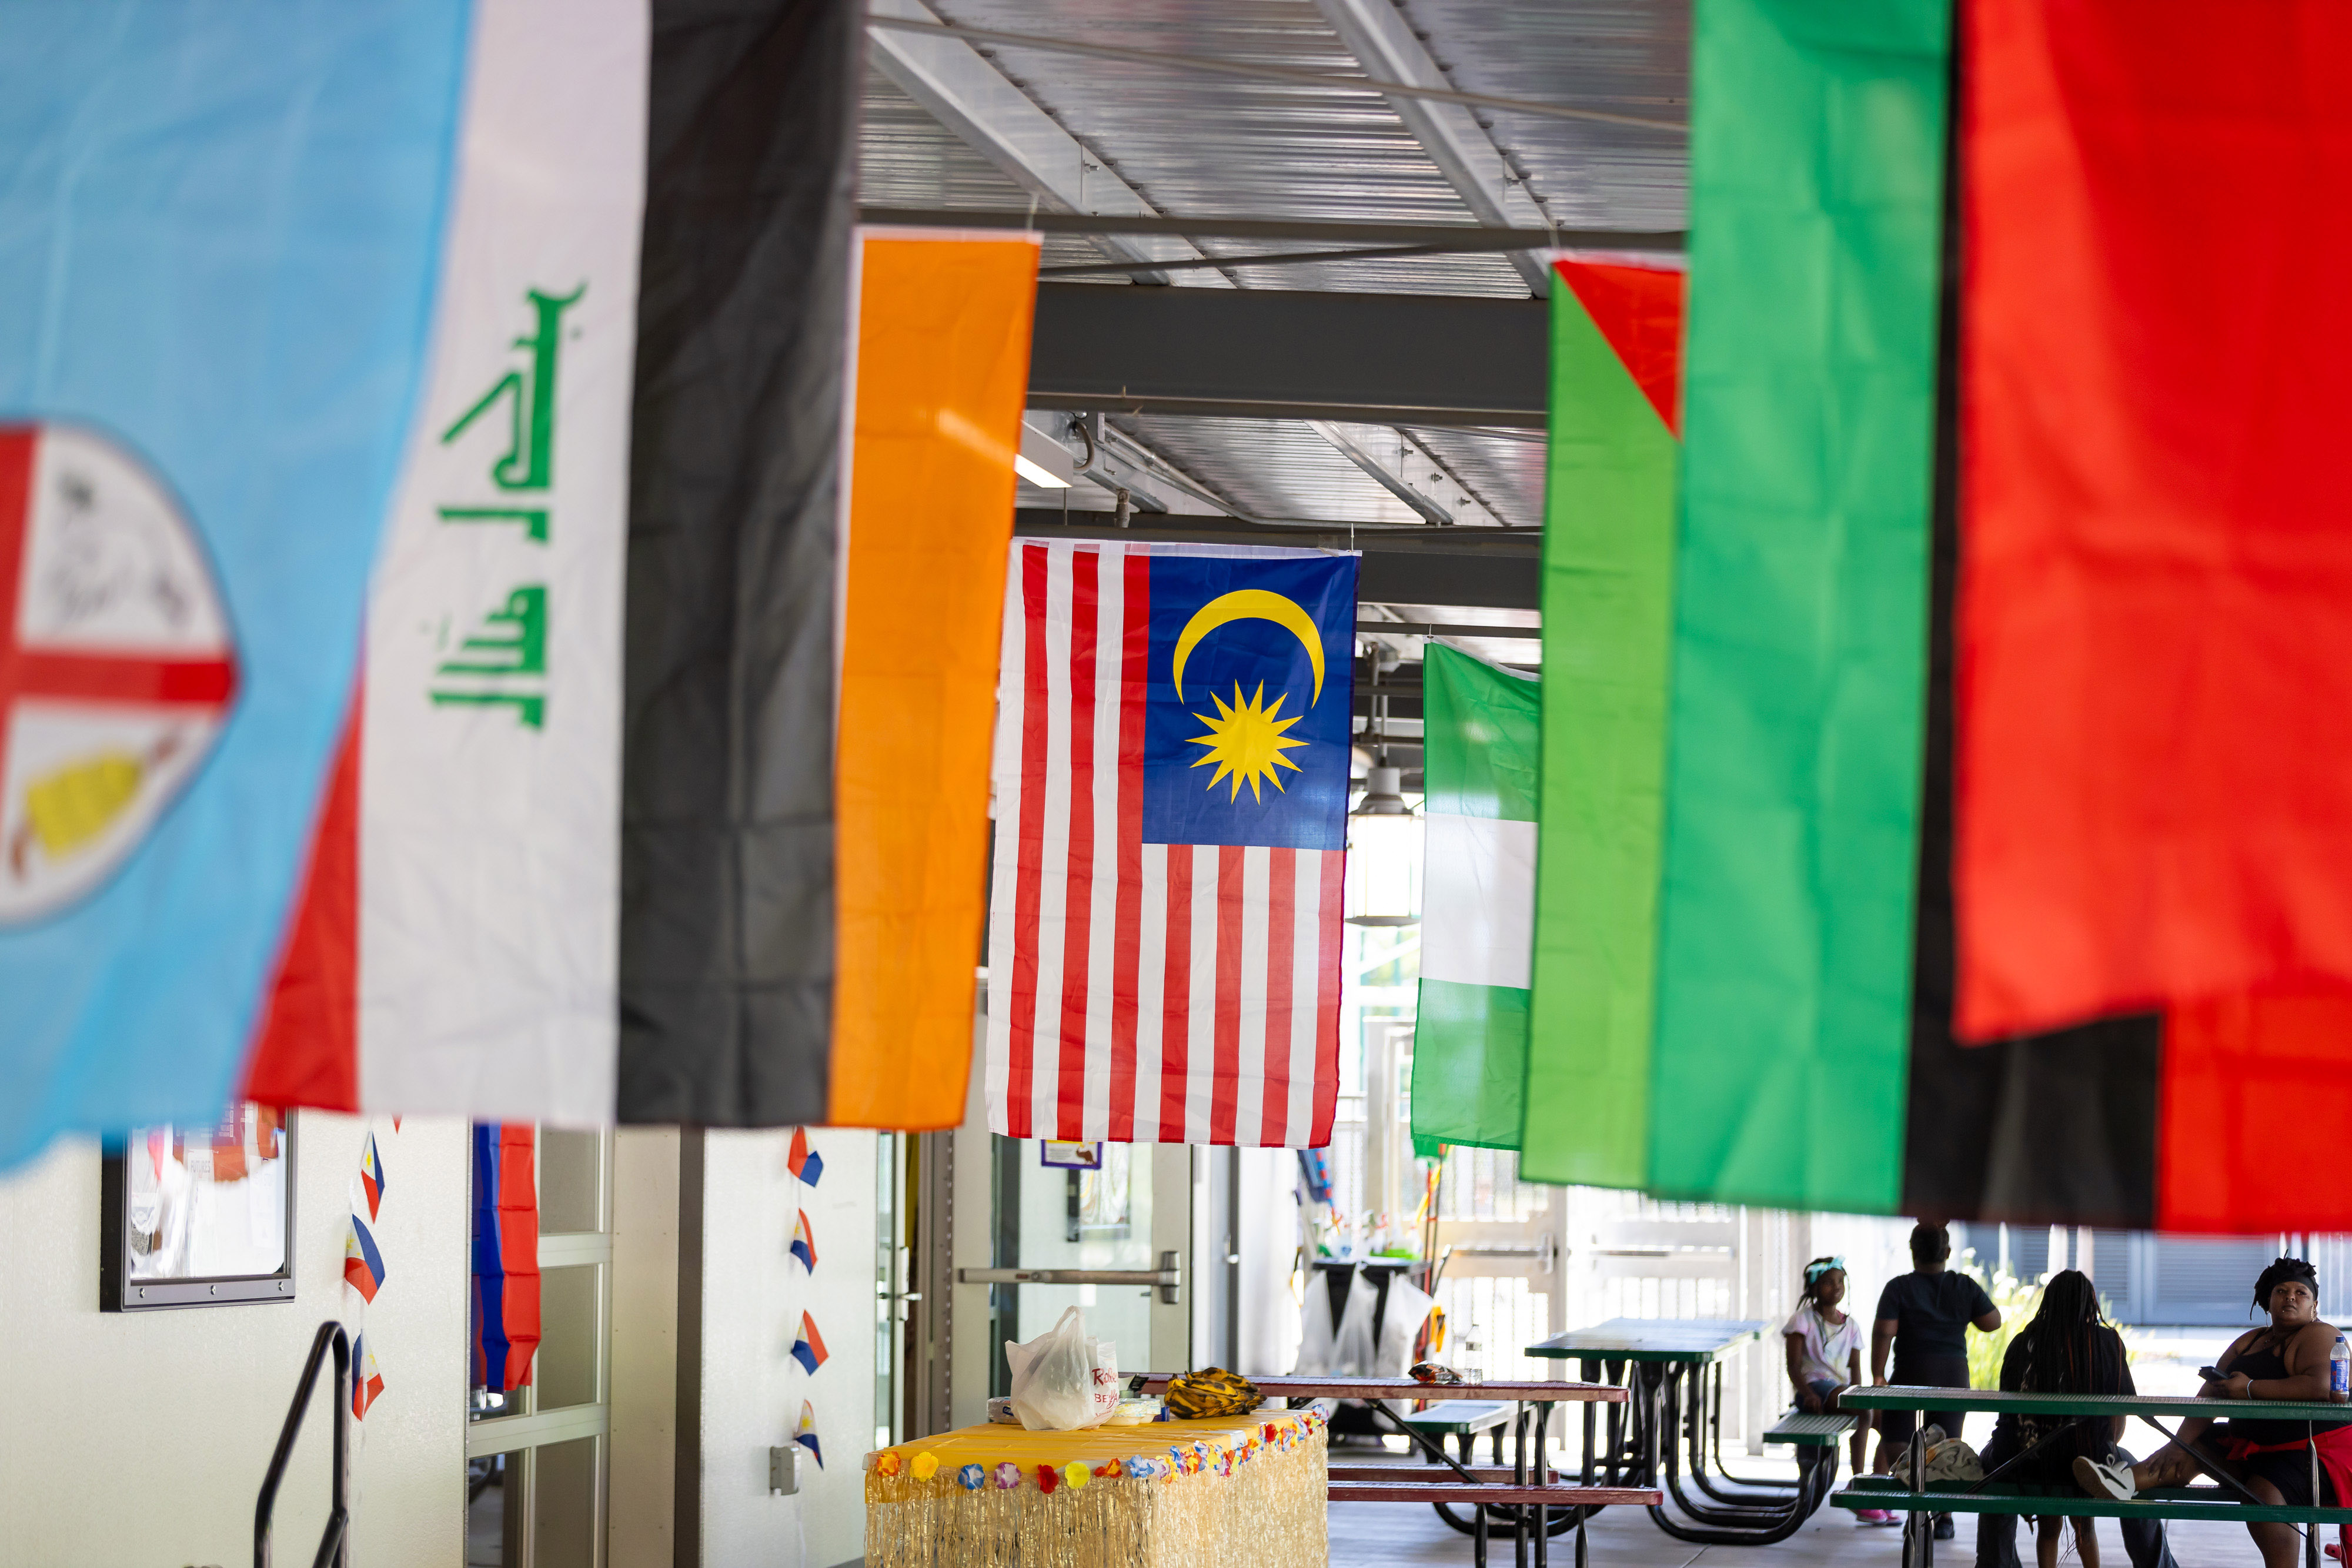 Multiple hanging flags of various countries